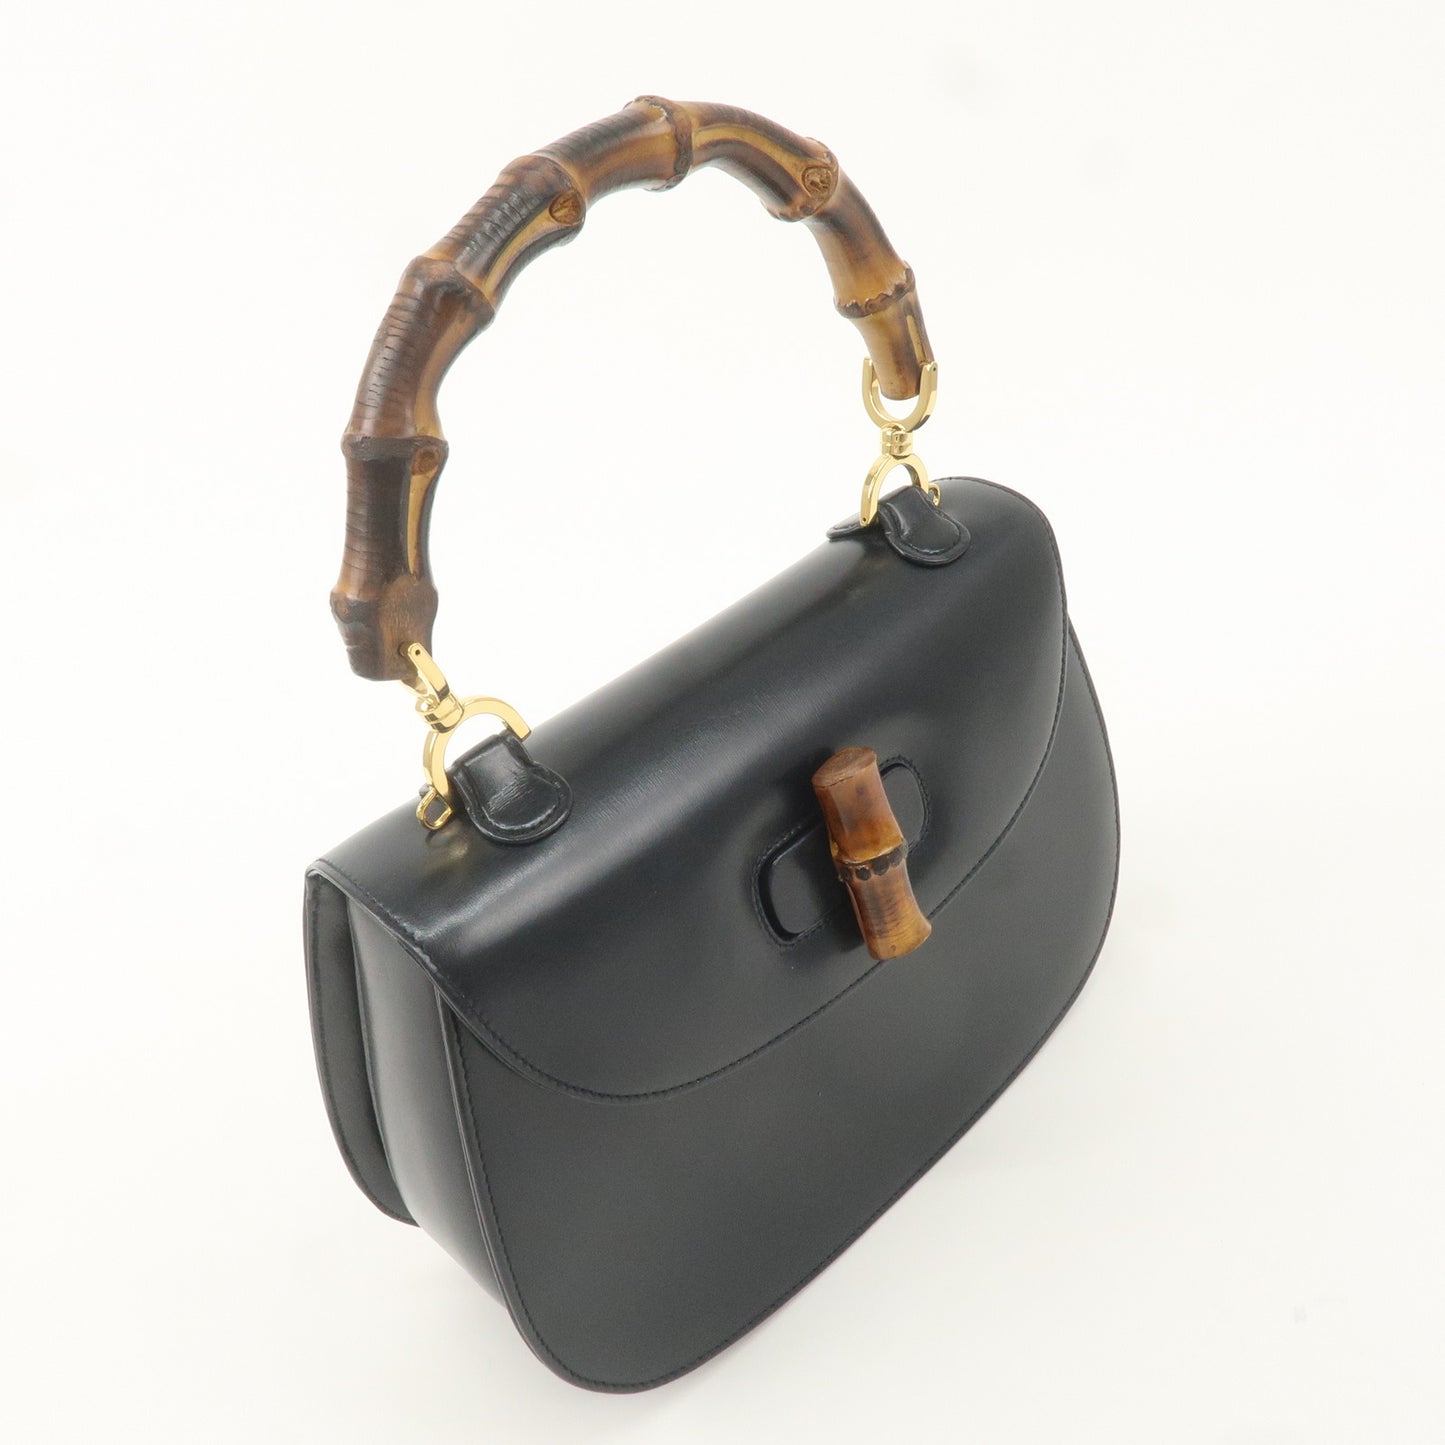 GUCCI Bamboo Leather Hand Bag Black 000.1951.0633